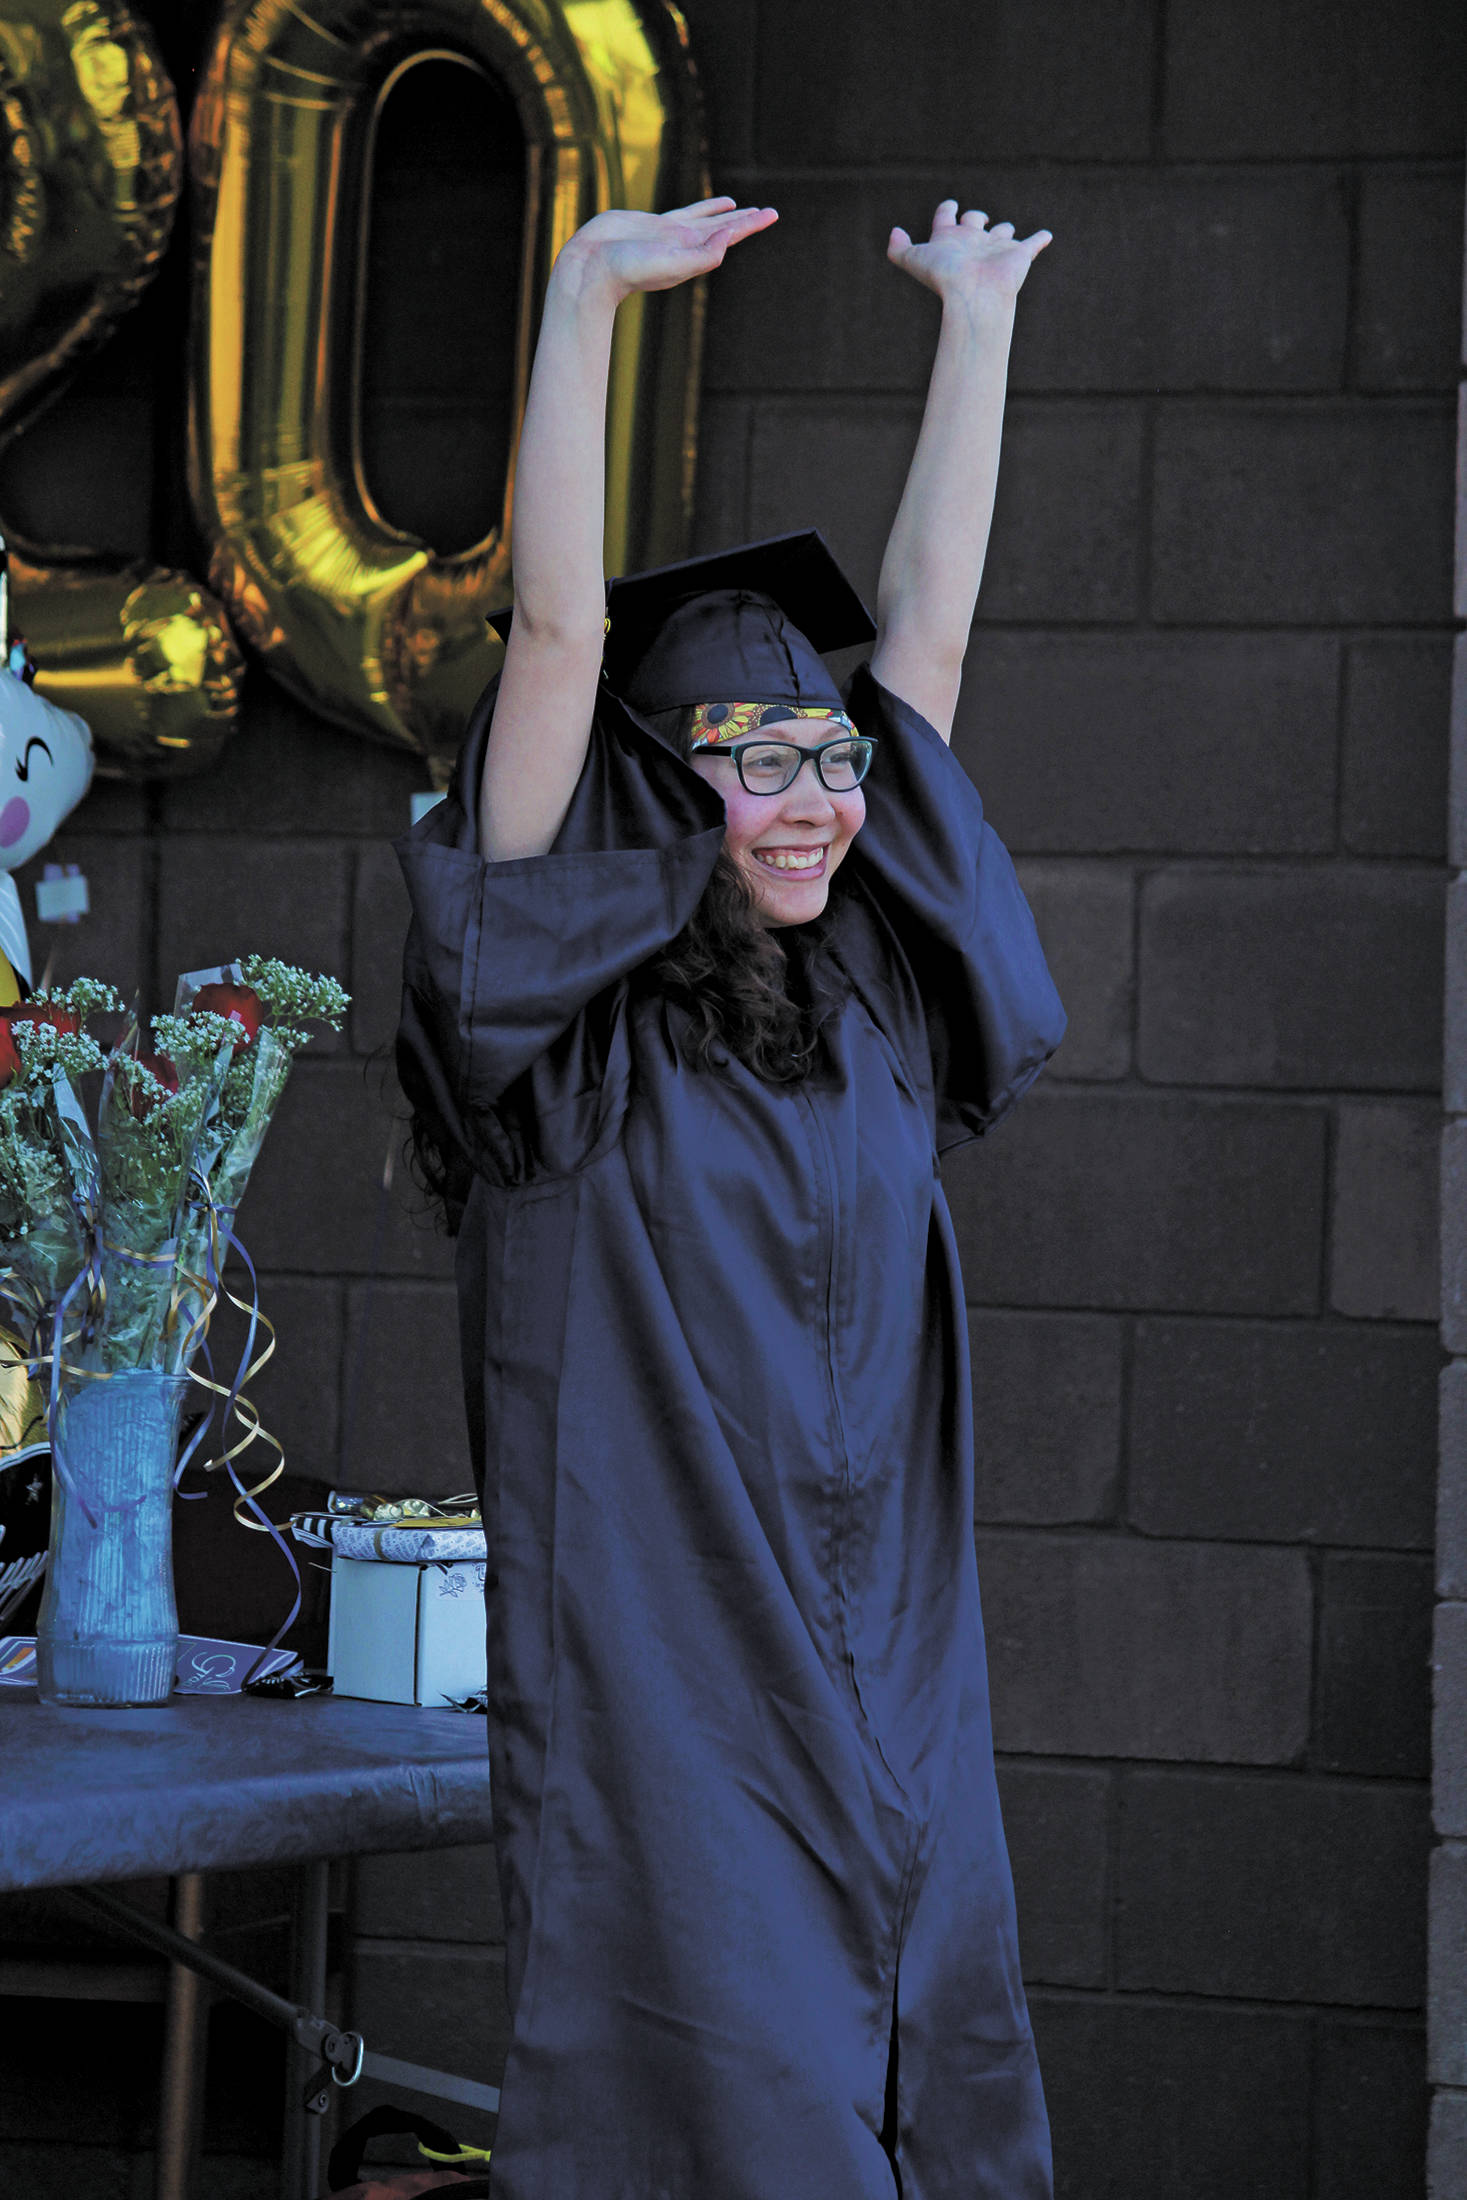 Ninilchik School graduate Anastacia Mata celebrates collecting her diploma in a Wednesday, May 20, 2020 alternative graduation ceremony at the school in Ninilchik, Alaska. (Photo by Megan Pacer/Homer News)